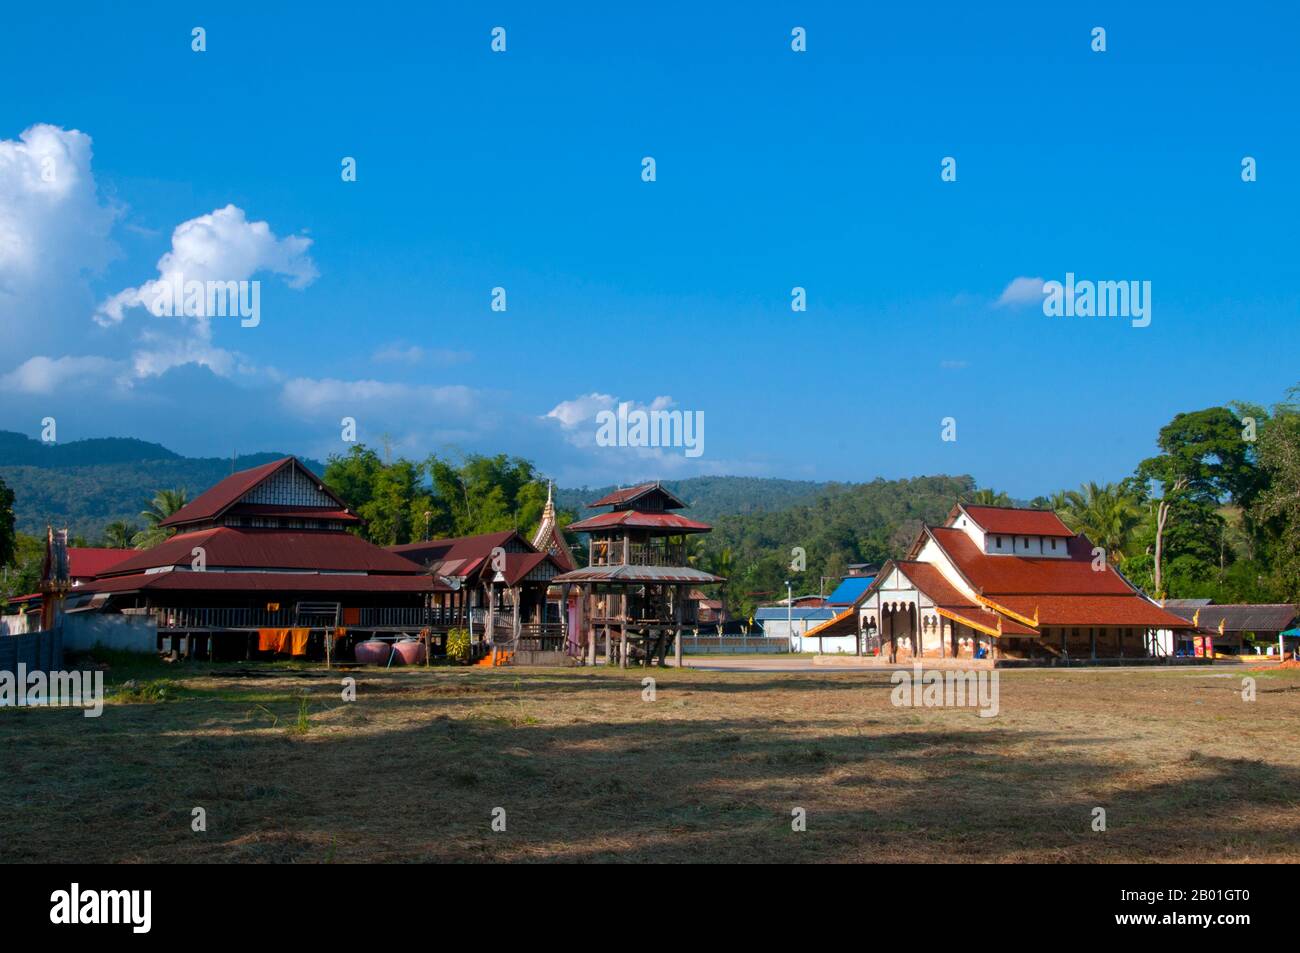 Thailand: Old wooden sala, bell tower and viharn at Wat Si Pho Chai Na Phung, Na Haeo District, Loei Province.  Loei (Thai: เลย) Province is located in Thailand's upper North-East. Neighboring provinces are (from east clockwise) Nong Khai, Udon Thani, Nongbua Lamphu, Khon Kaen, Phetchabun, Phitsanulok. In the north it borders Xaignabouli and Vientiane Provinces of Laos.  The province is covered with low mountains, while the capital Loei is located in a fertile basin. The Loei River, which flows through the province, is a tributary of the Mekong. Stock Photo